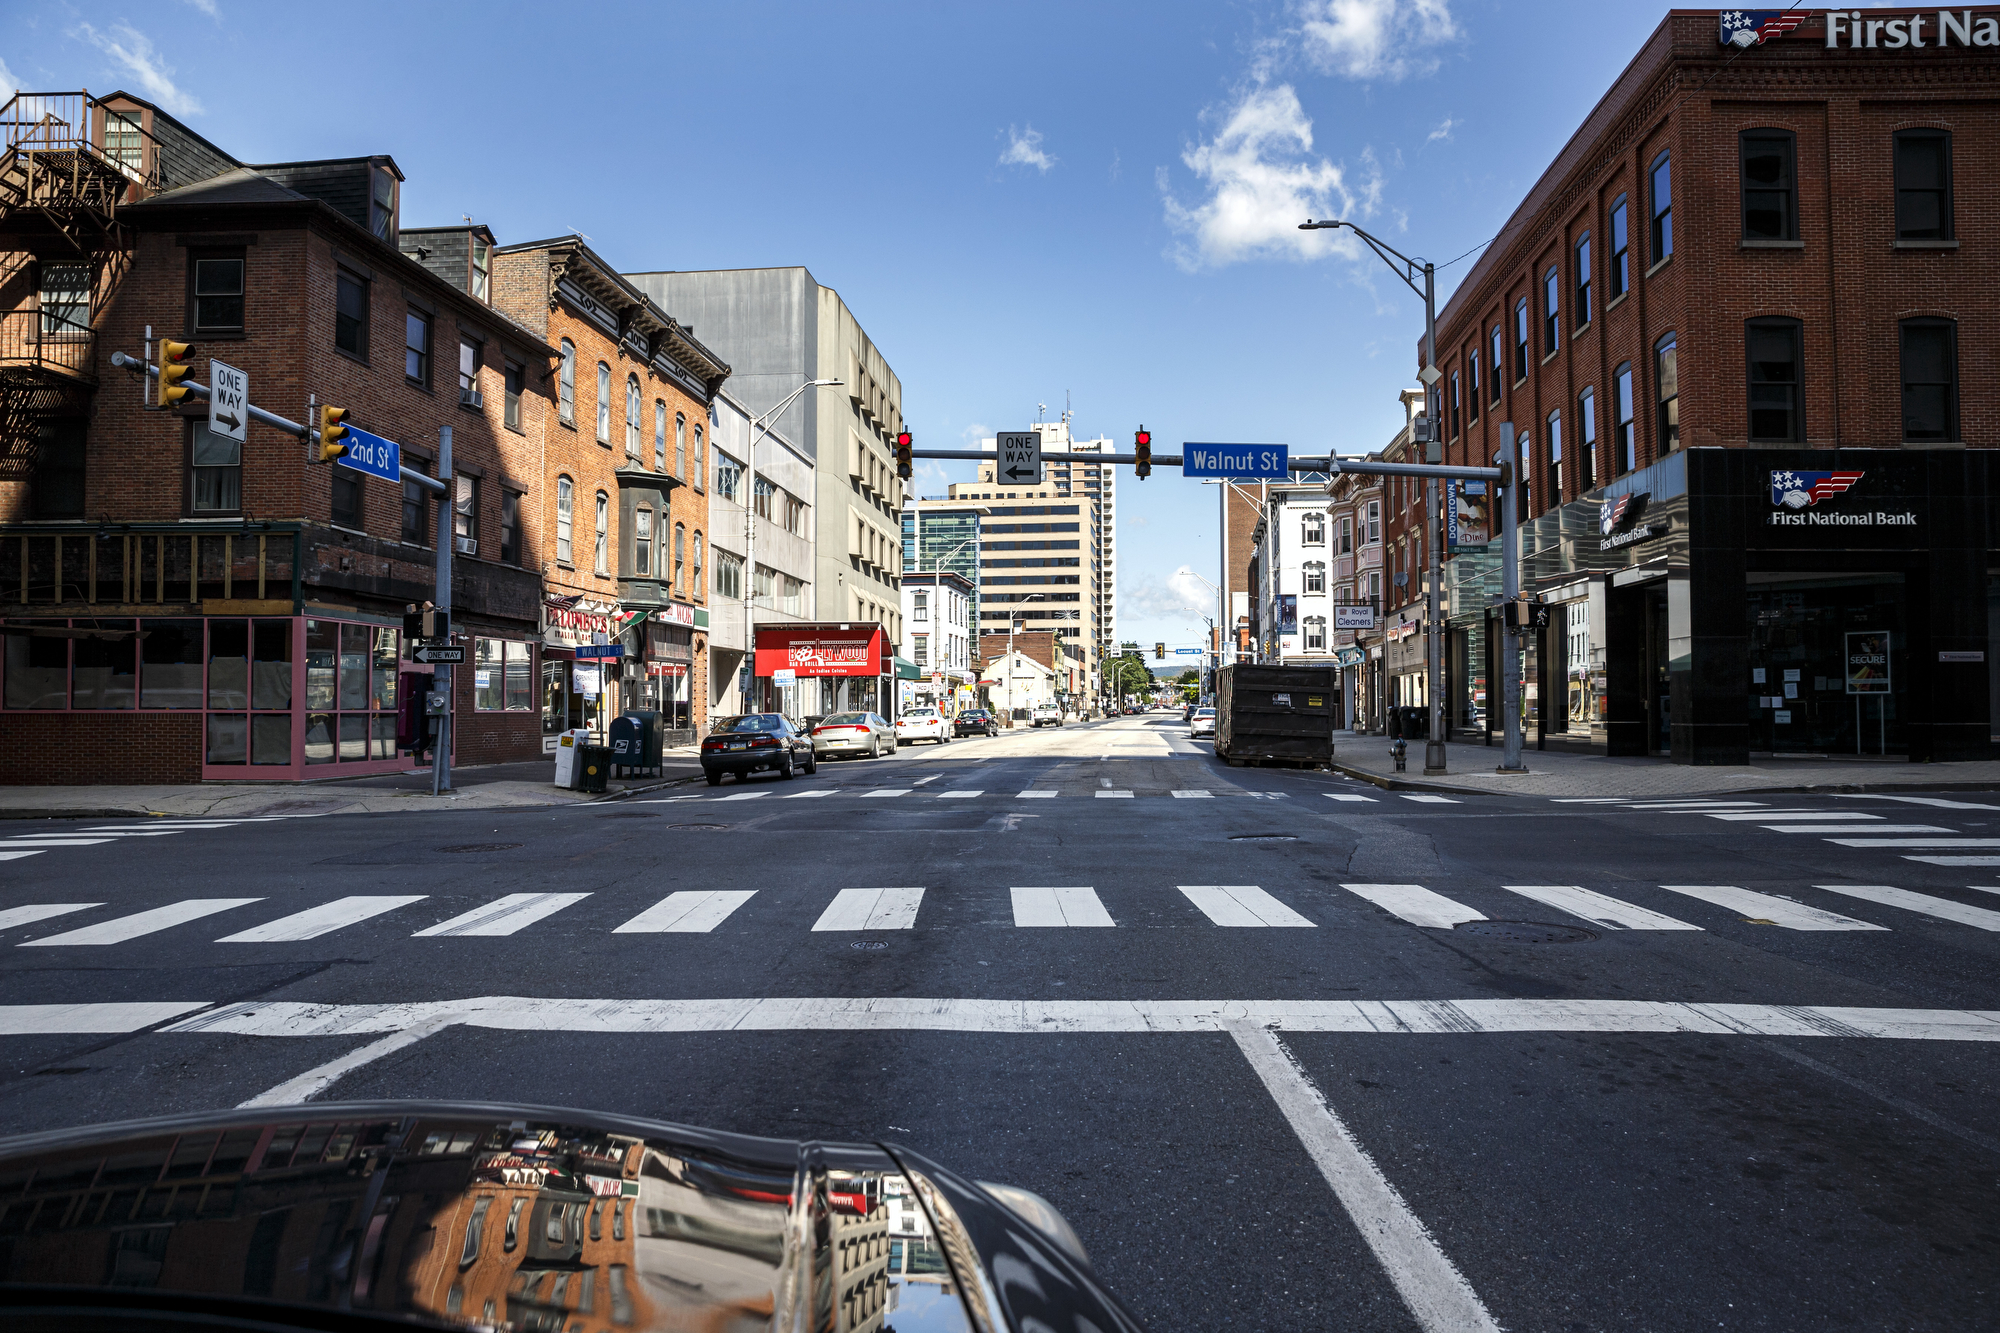 Second and Walnut streets in Harrisburg. The streets of Harrisburg the day after protests over the death of George Floyd turned violent.
May 31, 2020. 
Dan Gleiter | dgleiter@pennlive.com